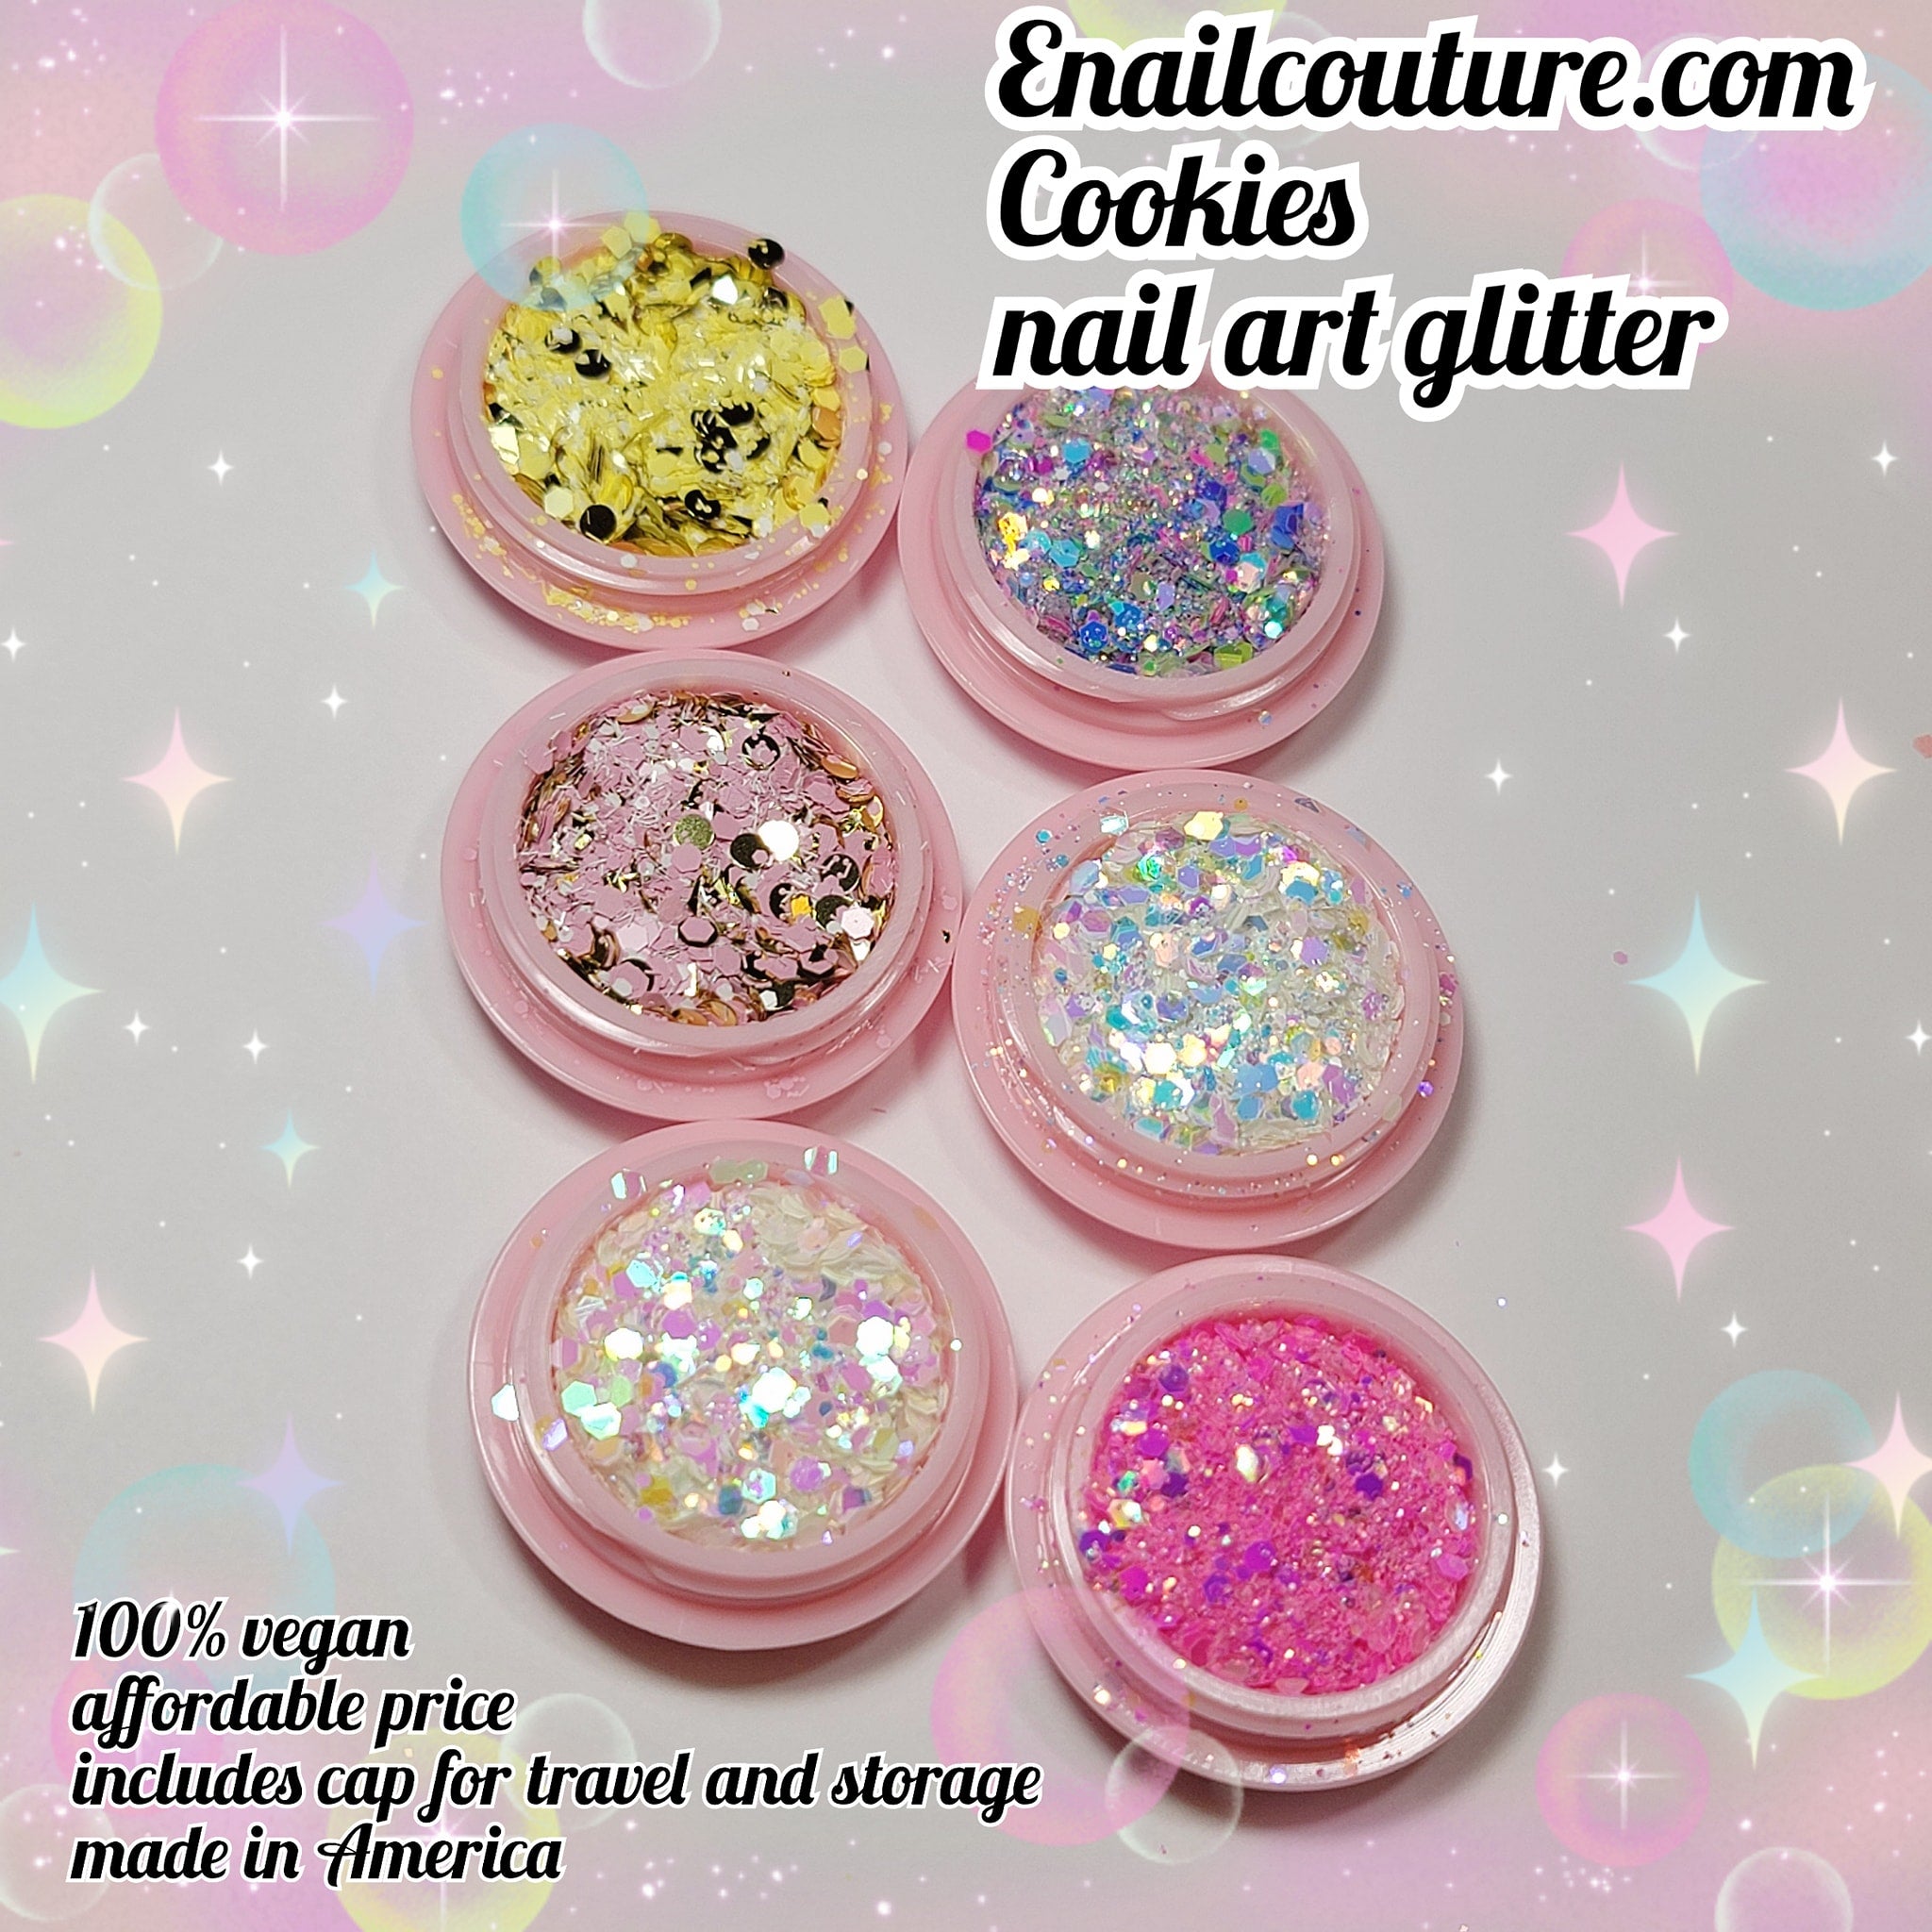 Cookies glitter set (Set of 6 Holographic Nail Glitter Mermaid Powder Flakes Shiny Charms Hexagon Nail Art Pigment Dust Decoration Manicure)